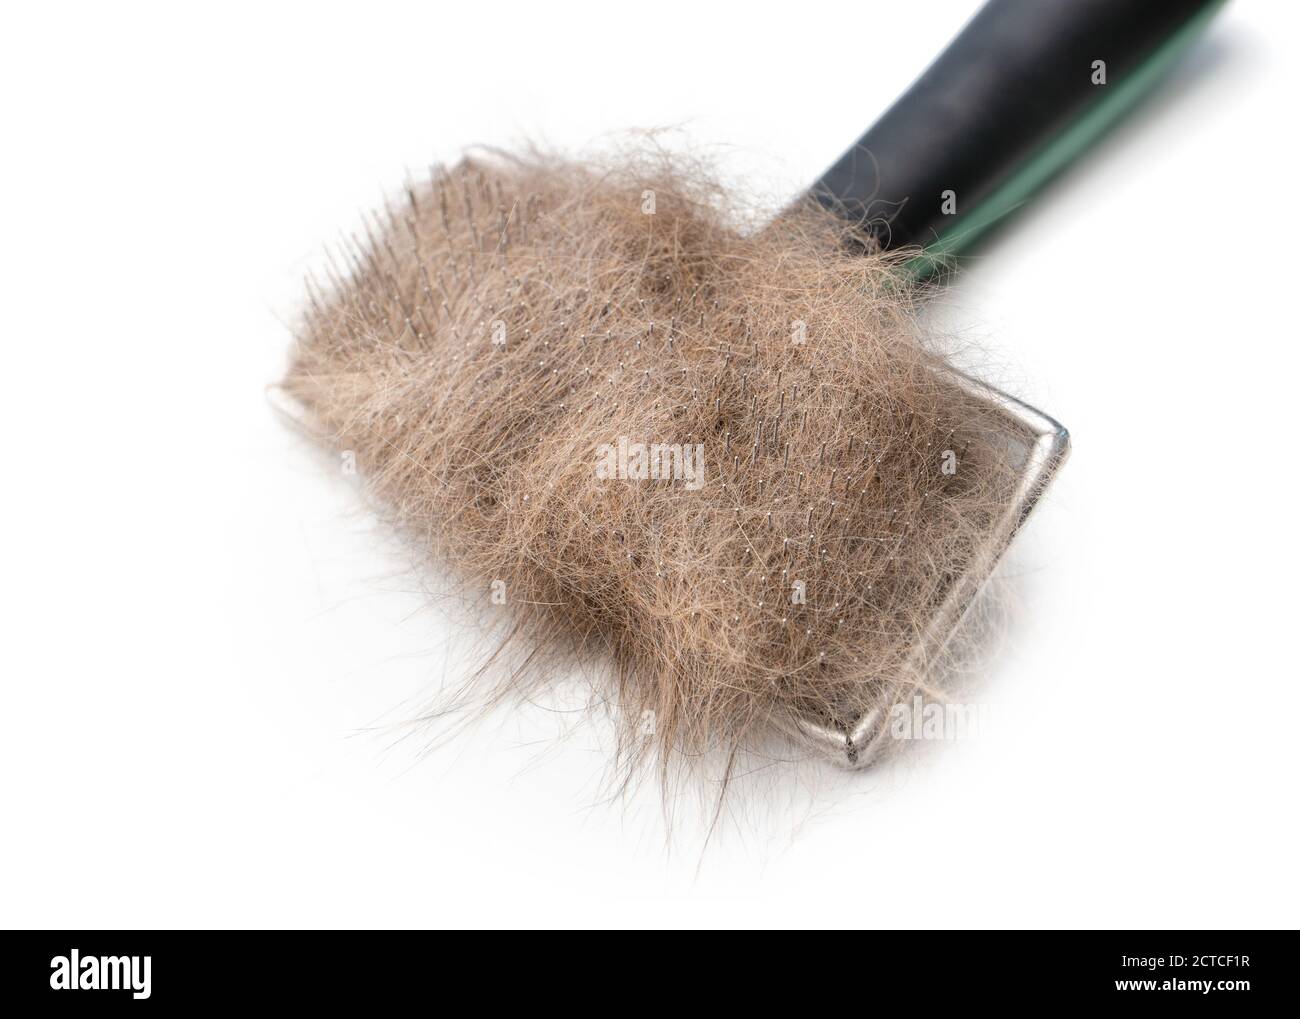 Cat brush with cat hair. Close up. Wire bristle grooming brush. Orange / brown fur stuck to comb. Brush knots and remove middle, under or winter coat. Stock Photo